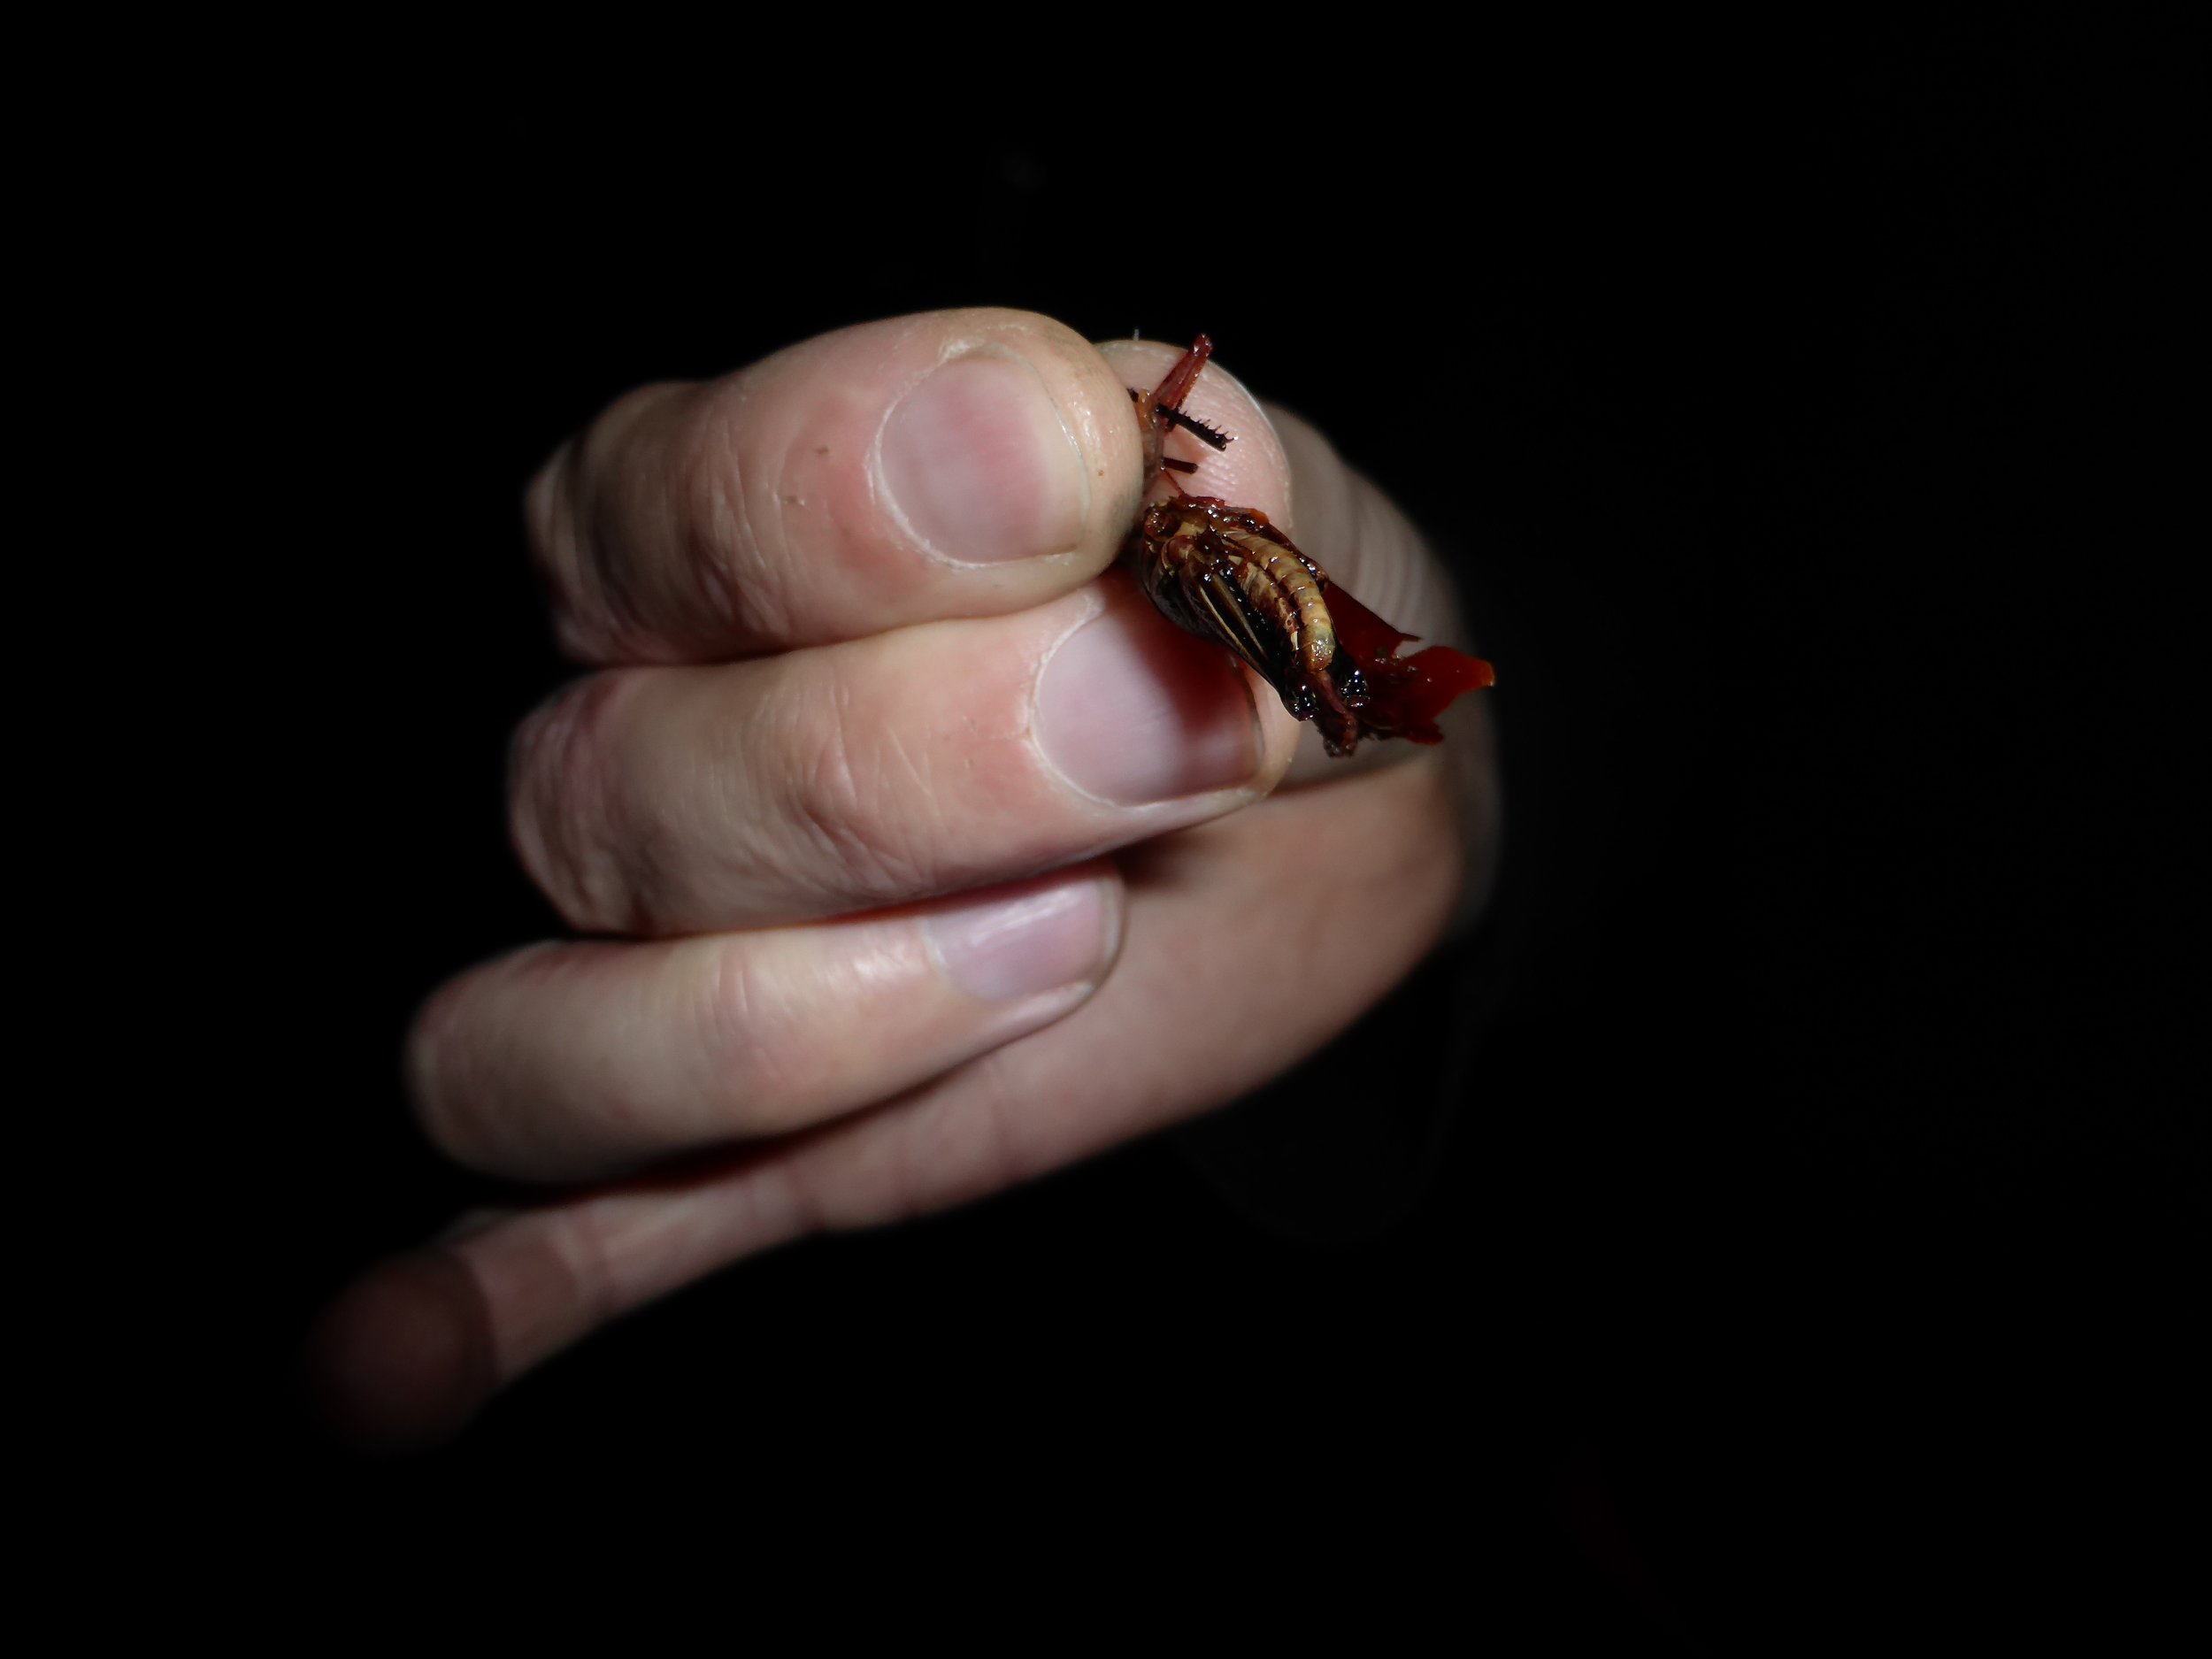  Michelle Lamphere: Eating bugs in Mexico 2014 